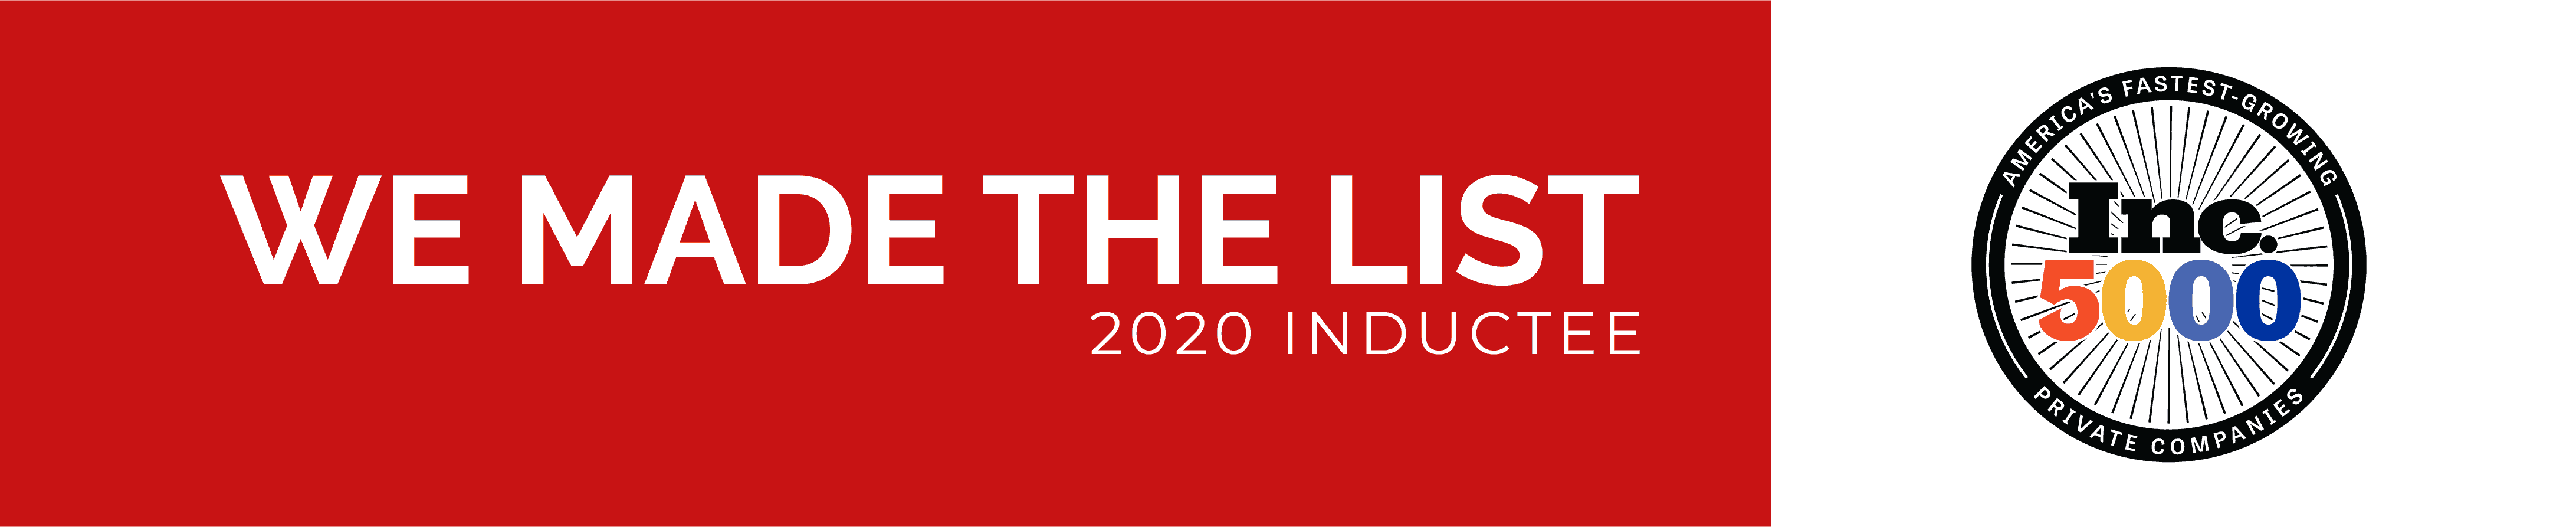 Red and white banner that says 'We made the list - 2020 Inductee' and the Inc 5000 logo on the right side